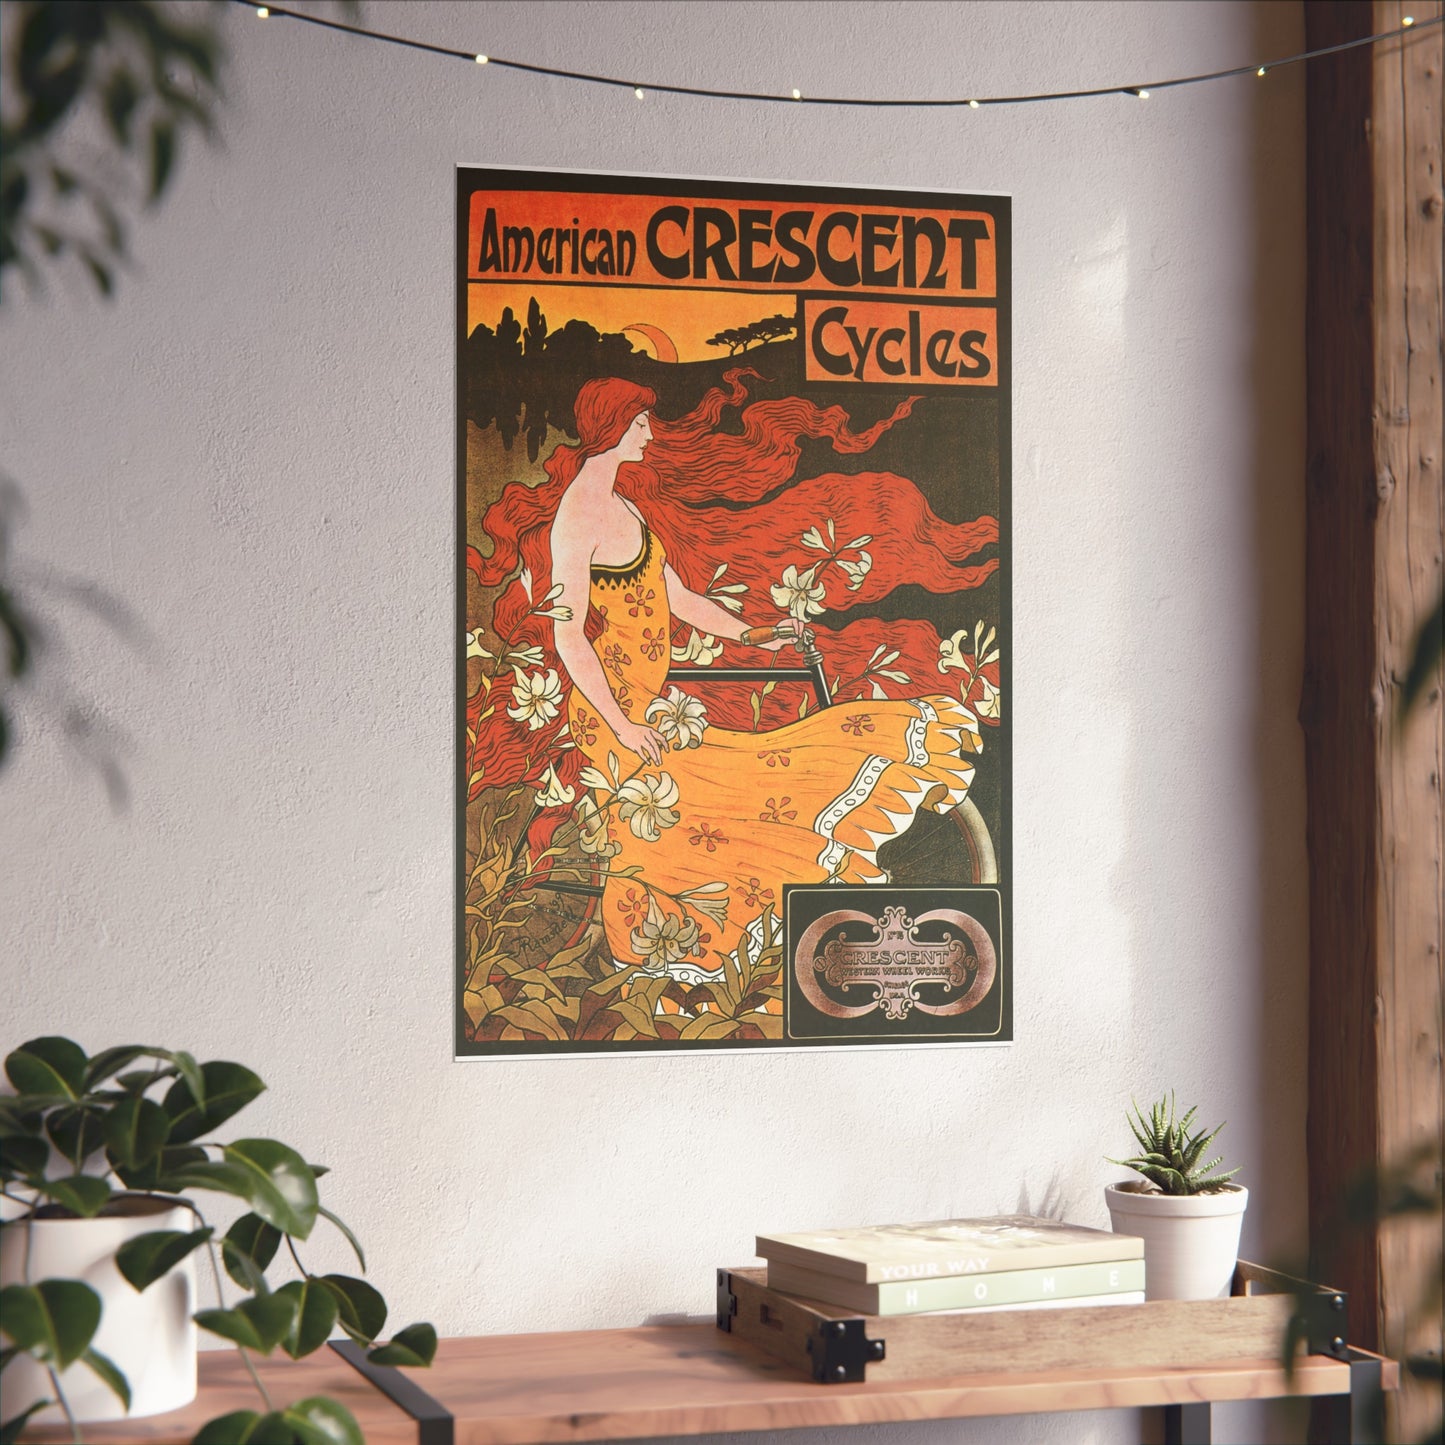 American Crescent Cycles - Vintage Bicycle Poster